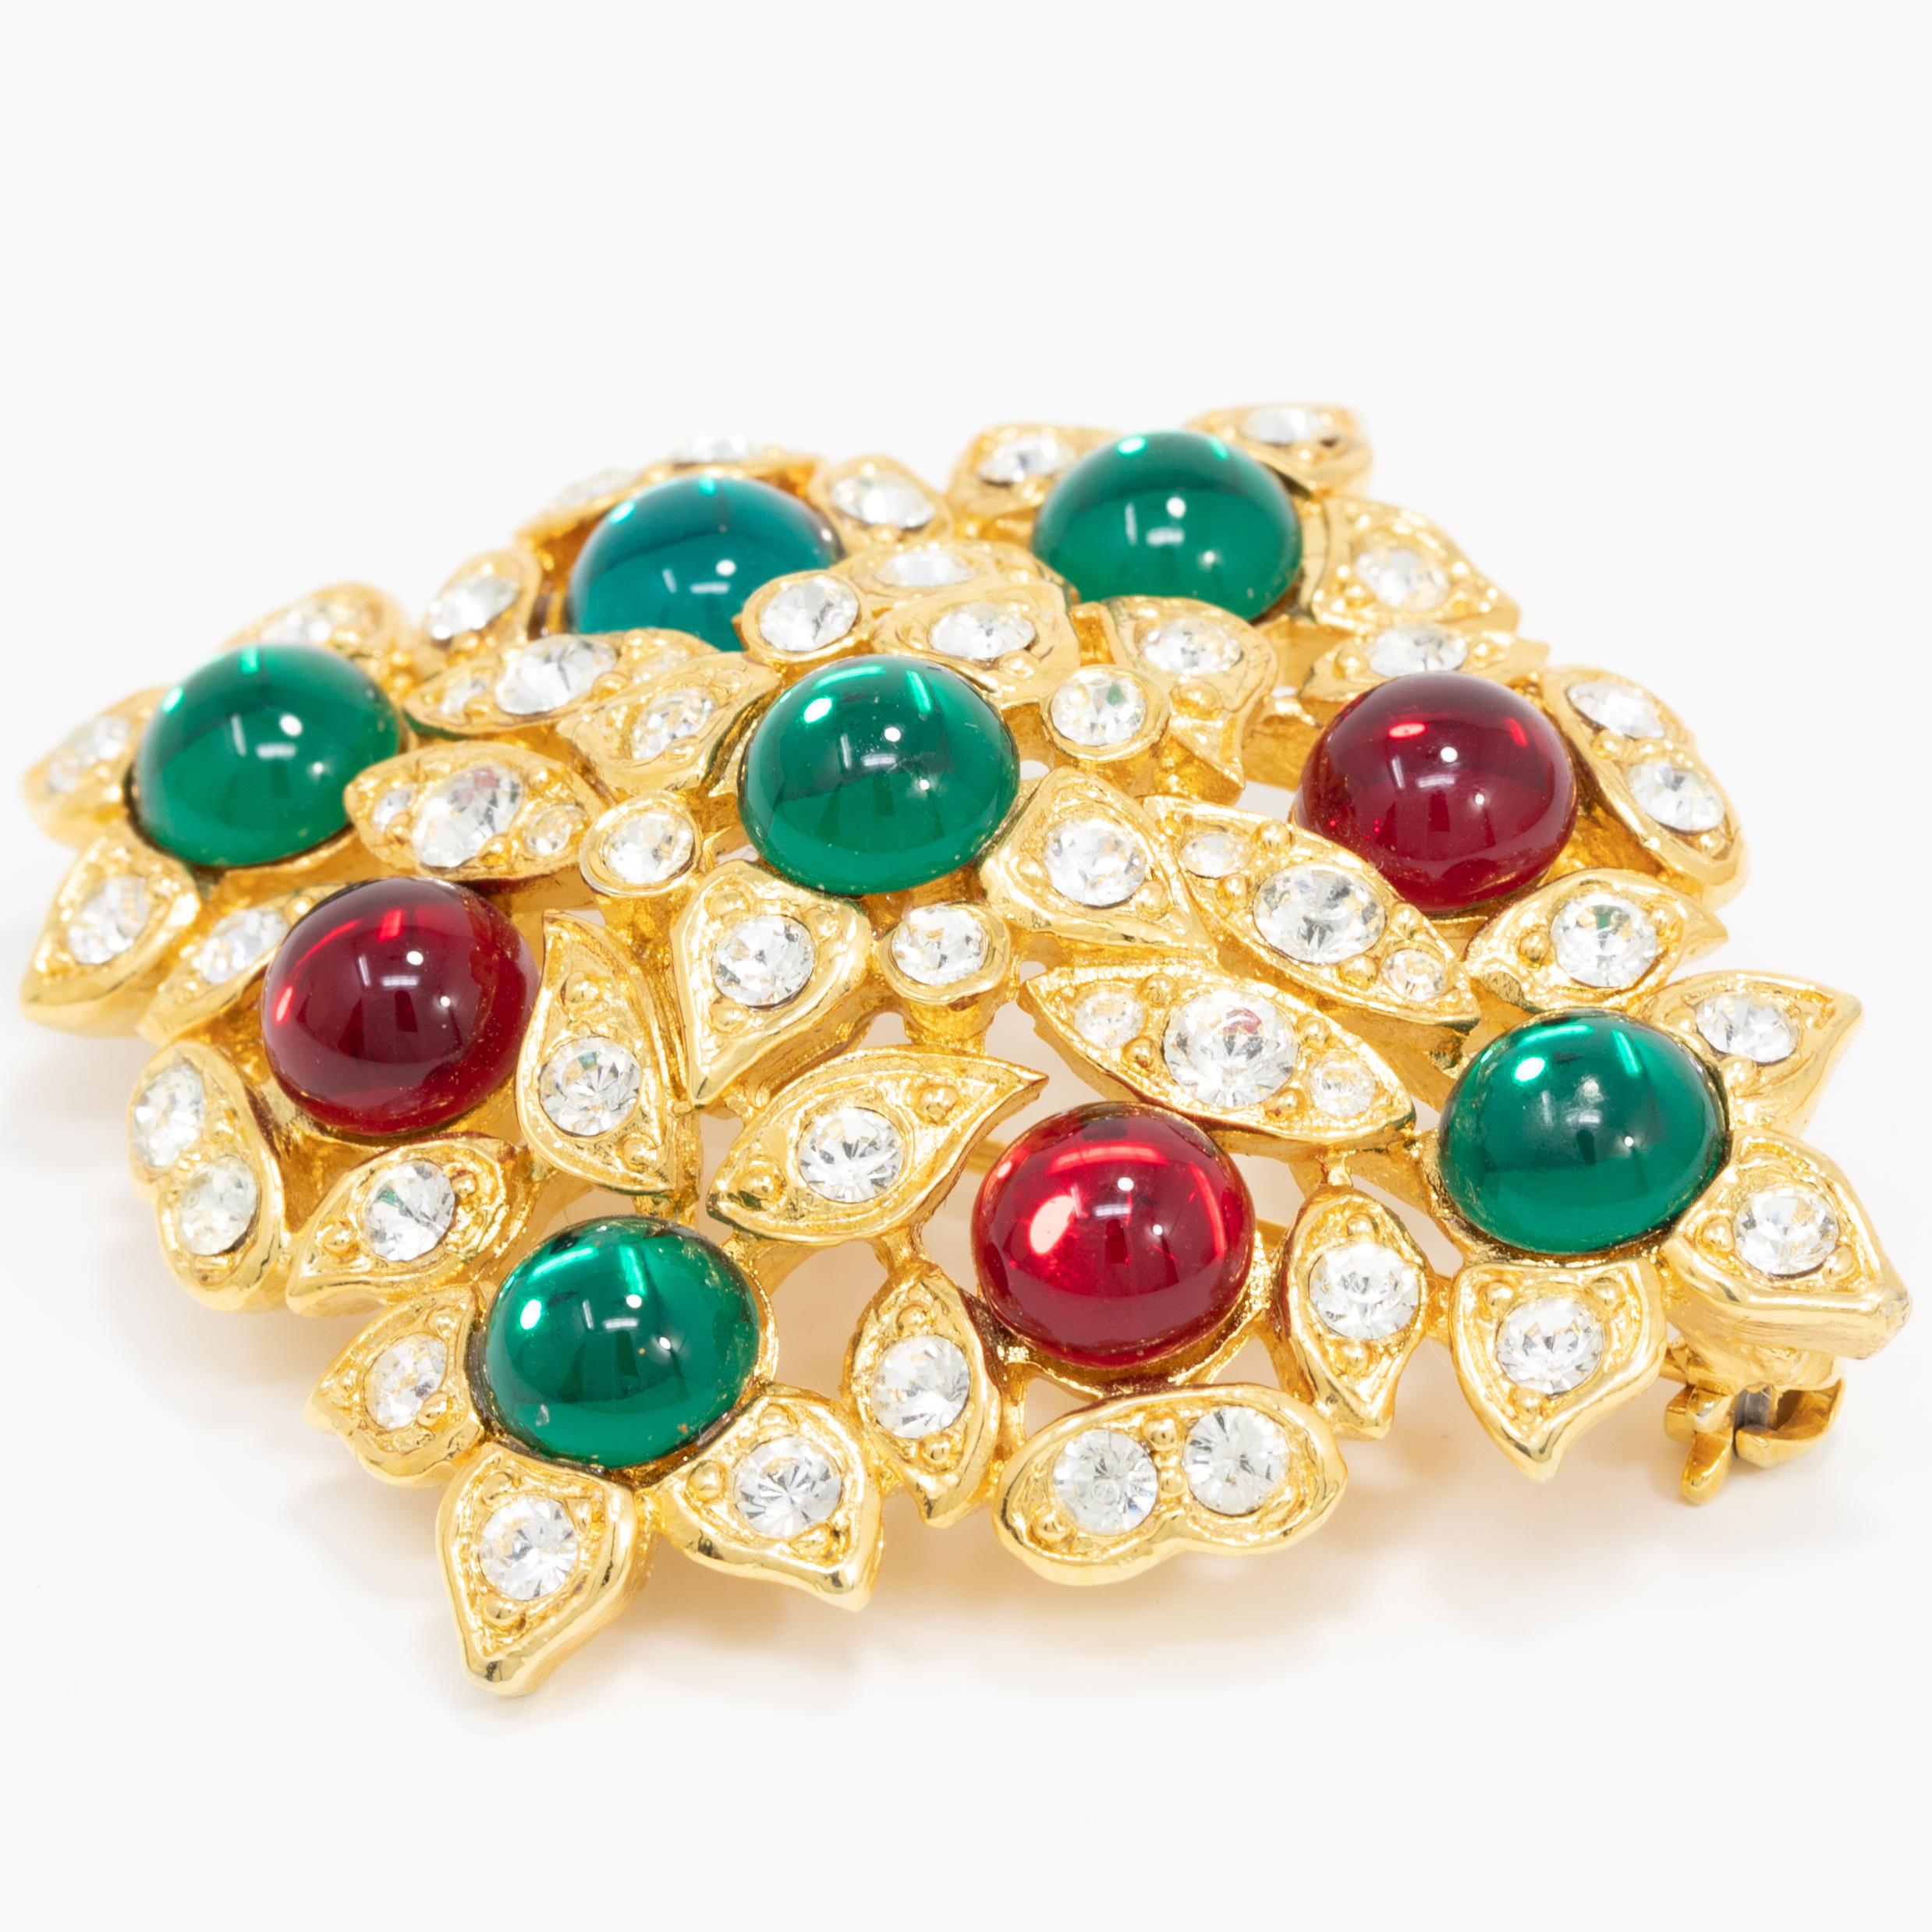 A colorful vintage pin from Hobe. Features vibrant red and green cabochons, accented with crystals and set on a gold-plated setting.

Mid 1900s.

Hallmarks/Marks/Signs: Hobe